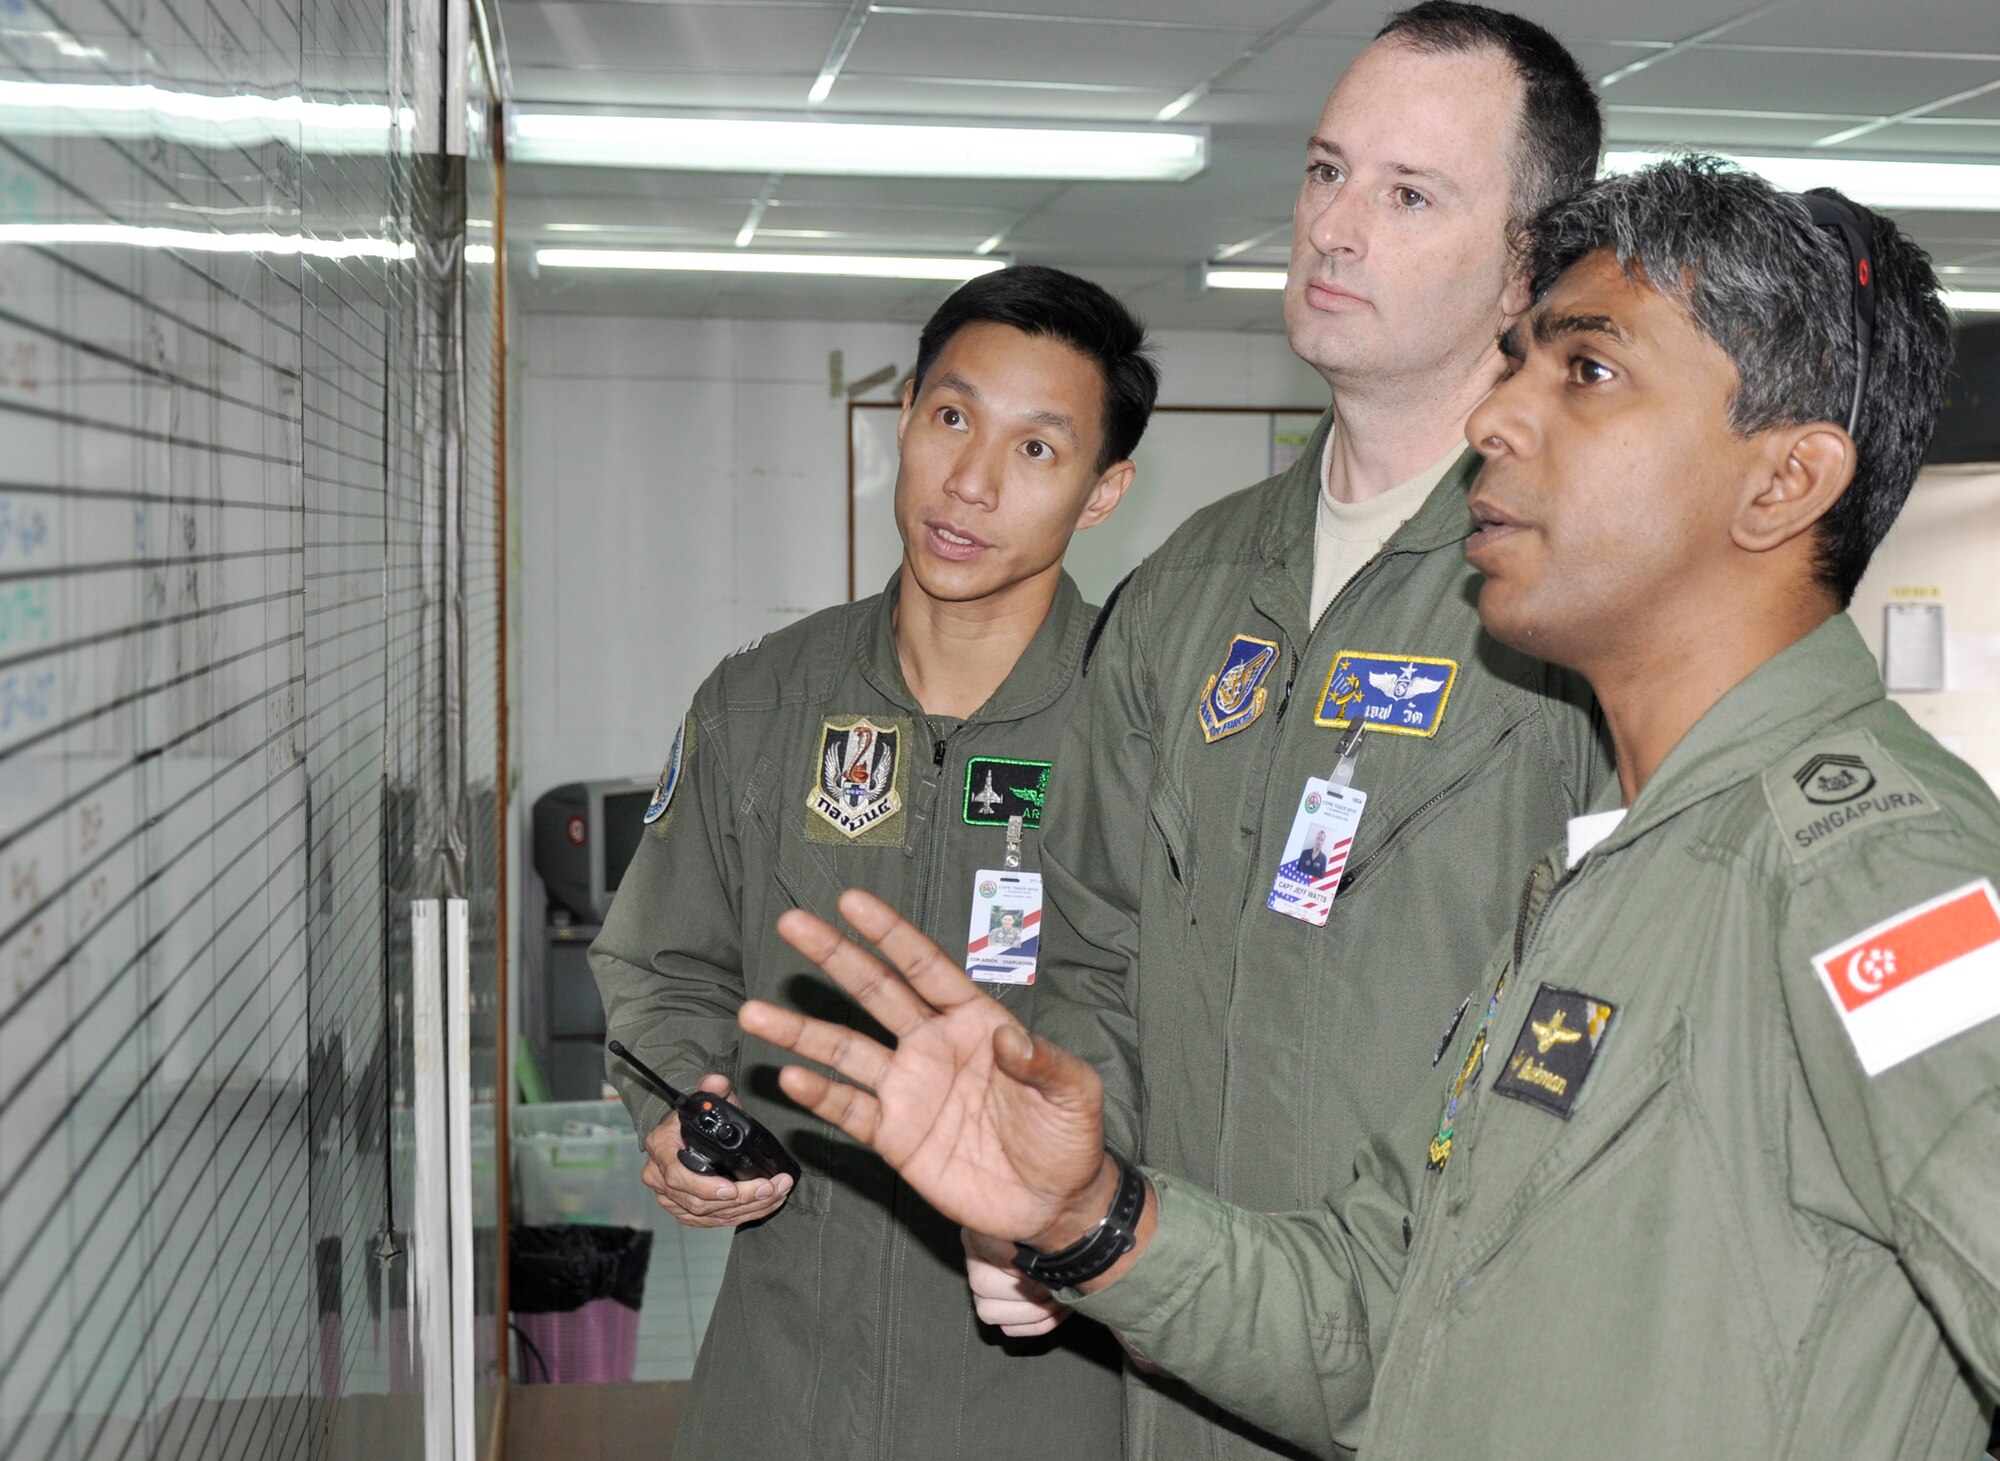 Republic of Singapore Air Force Master Warrant Officer Andre Ravi, discusses scheduling issues with U.S. Air Force Capt. Jeff Watts and Royal Thai Air Force Wing Commander Arnon Charusombat March 11, 2010 during Cope Tiger 2010 in Thailand. The airmen have worked together during the past four Cope Tiger exercises deconflicting airspace issues and tracking the flying schedule. (U.S. Air Force photo/Capt. Christy Stravolo)